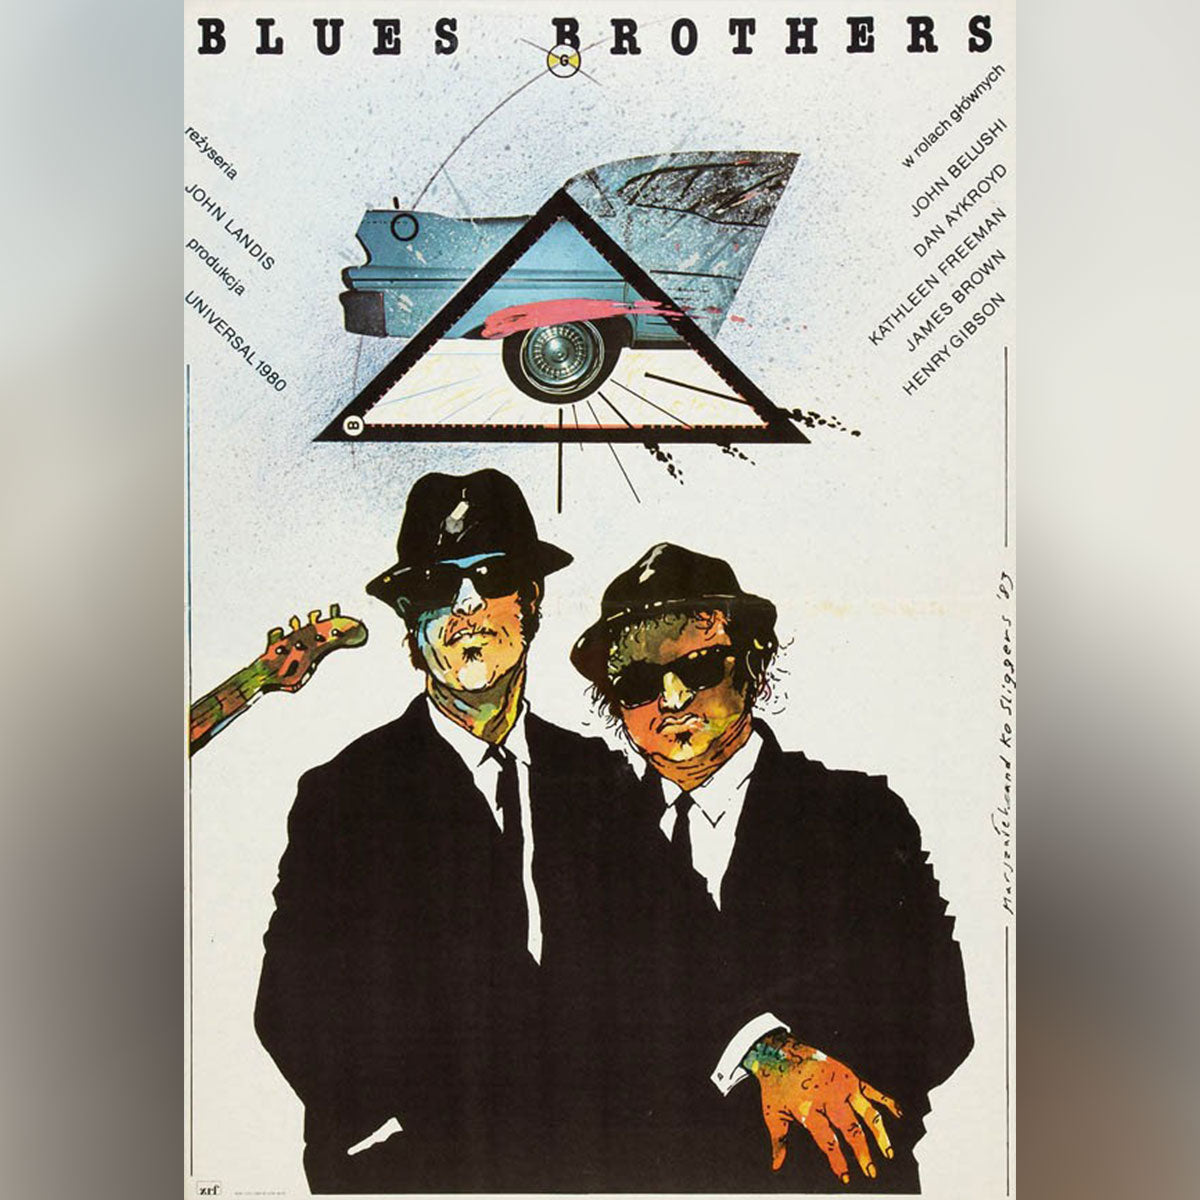 Blues Brothers, The (1980)